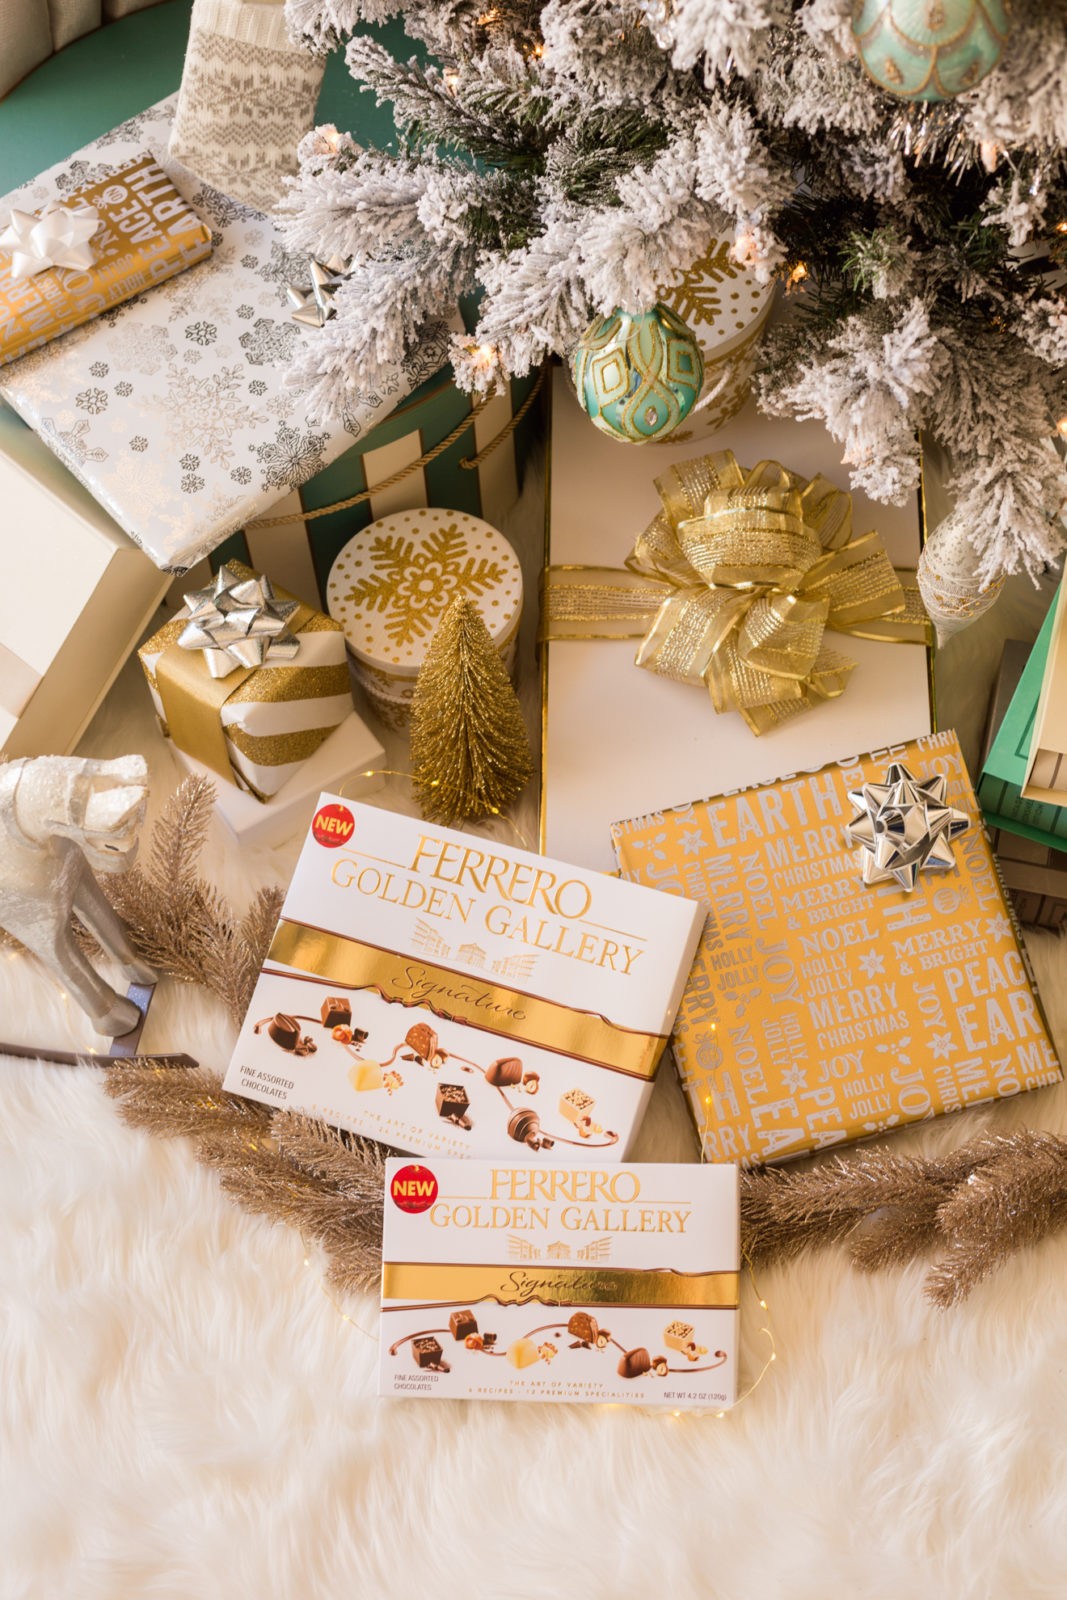 The Perfect Gift for Everyone, Ferrero Golden Gallery Signature Chocolates by Lifestyle Blogger Laura Lily | Ferrero Golden Gallery: The Perfect Holiday Gift for Everyone by popular Los Angeles life and style blogger, Laura Lily: image of wrapped presents and a couple boxes of Ferrero Golden Gallery chocolates under a Christmas tree.